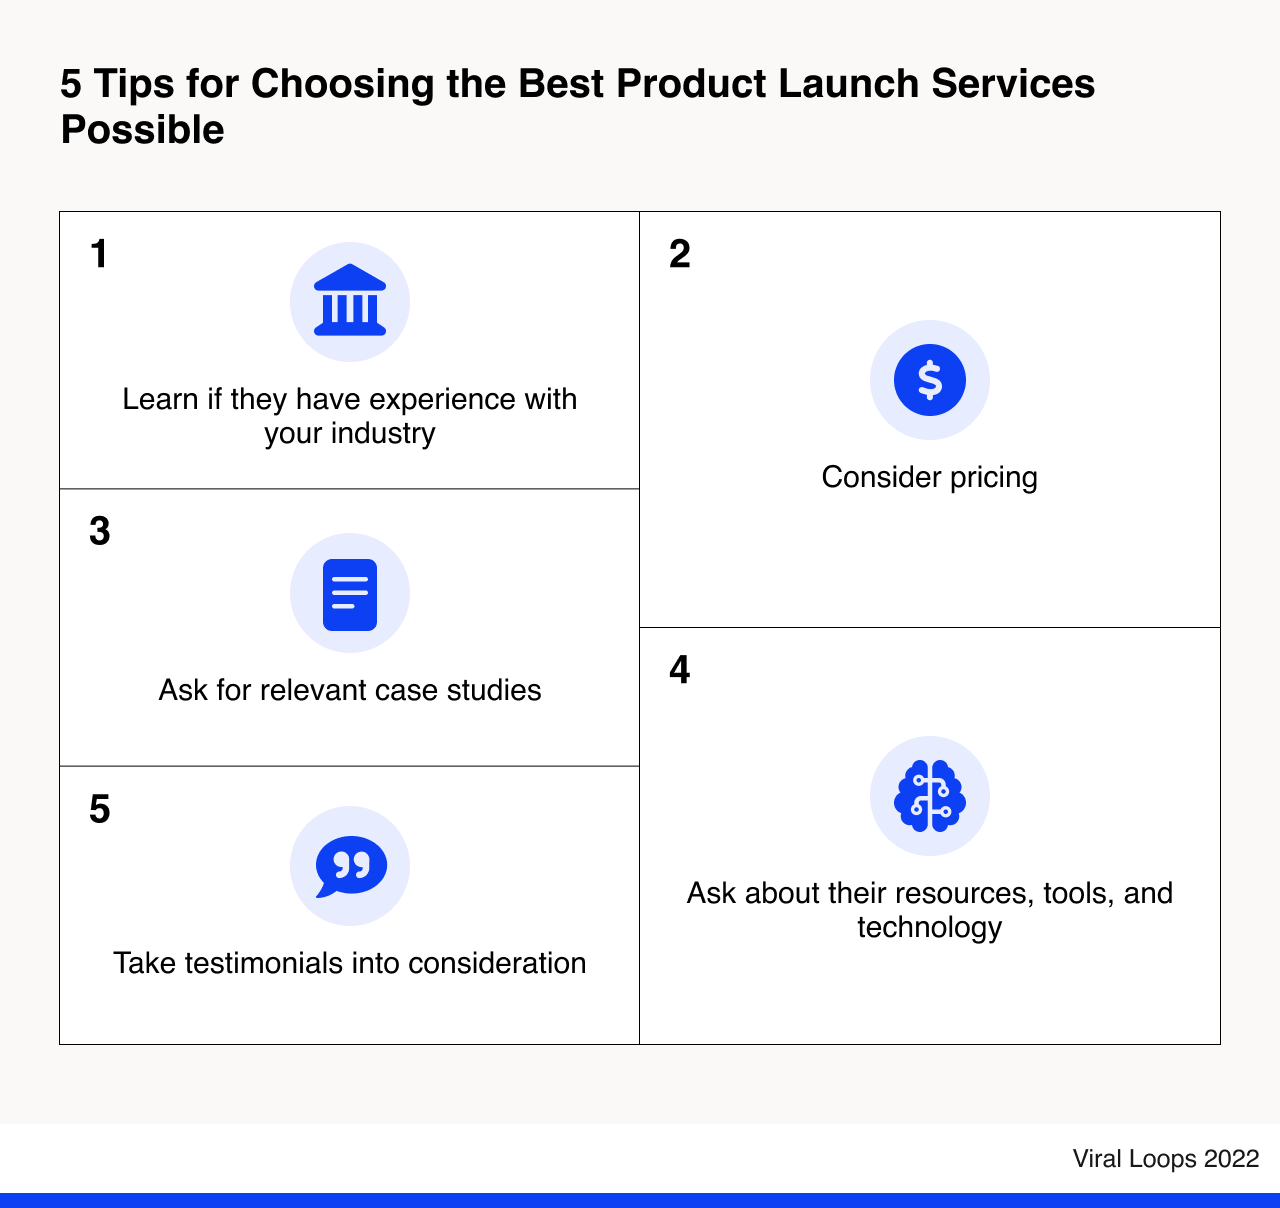 5 tips on choosing the best possible product launches services.